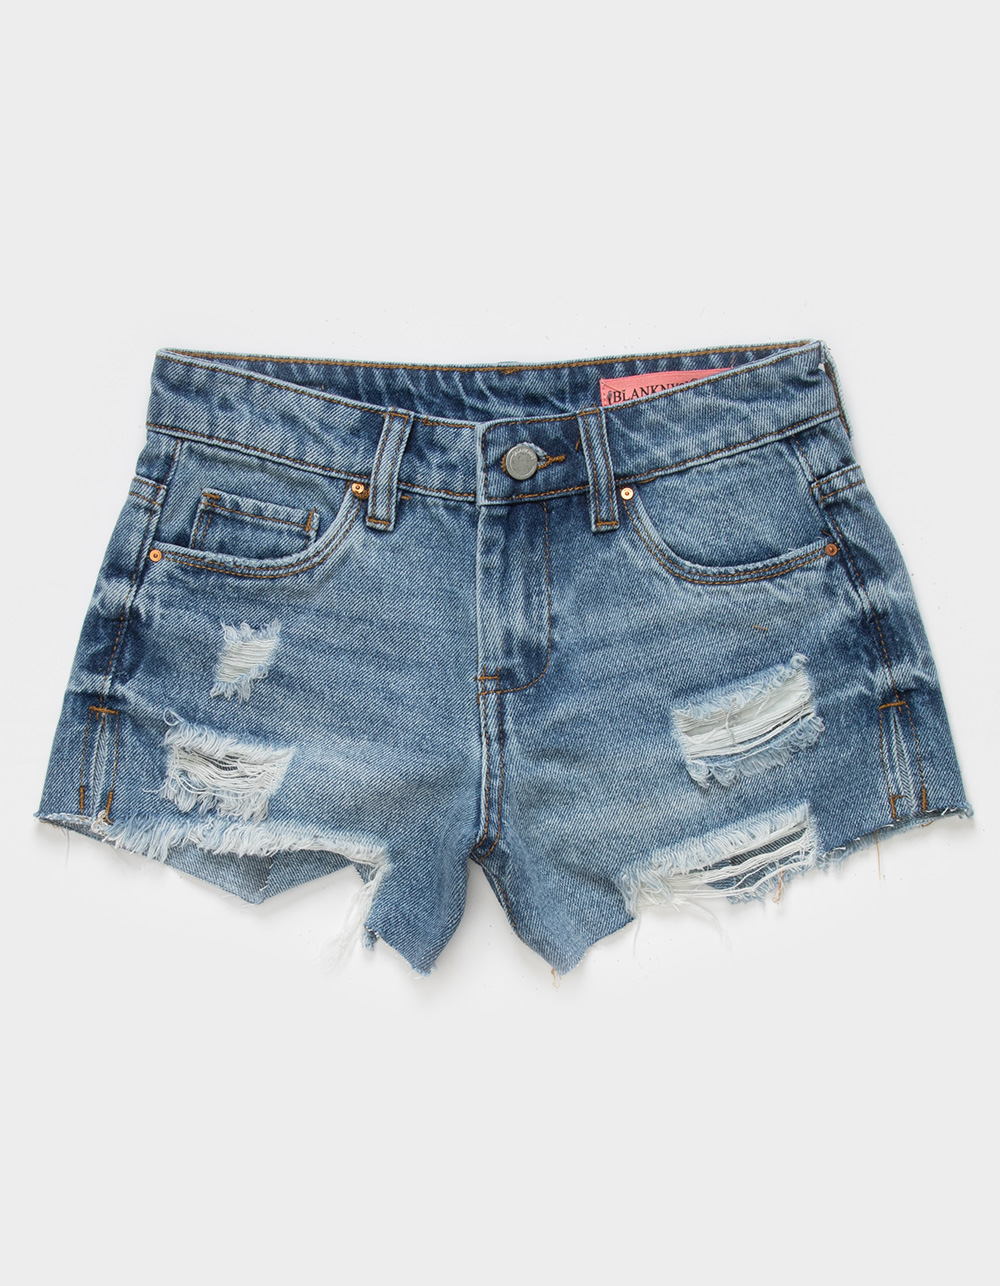 Frayed Distressed Jean Shorts, Hot Pink Short Jeans, Kids Hole